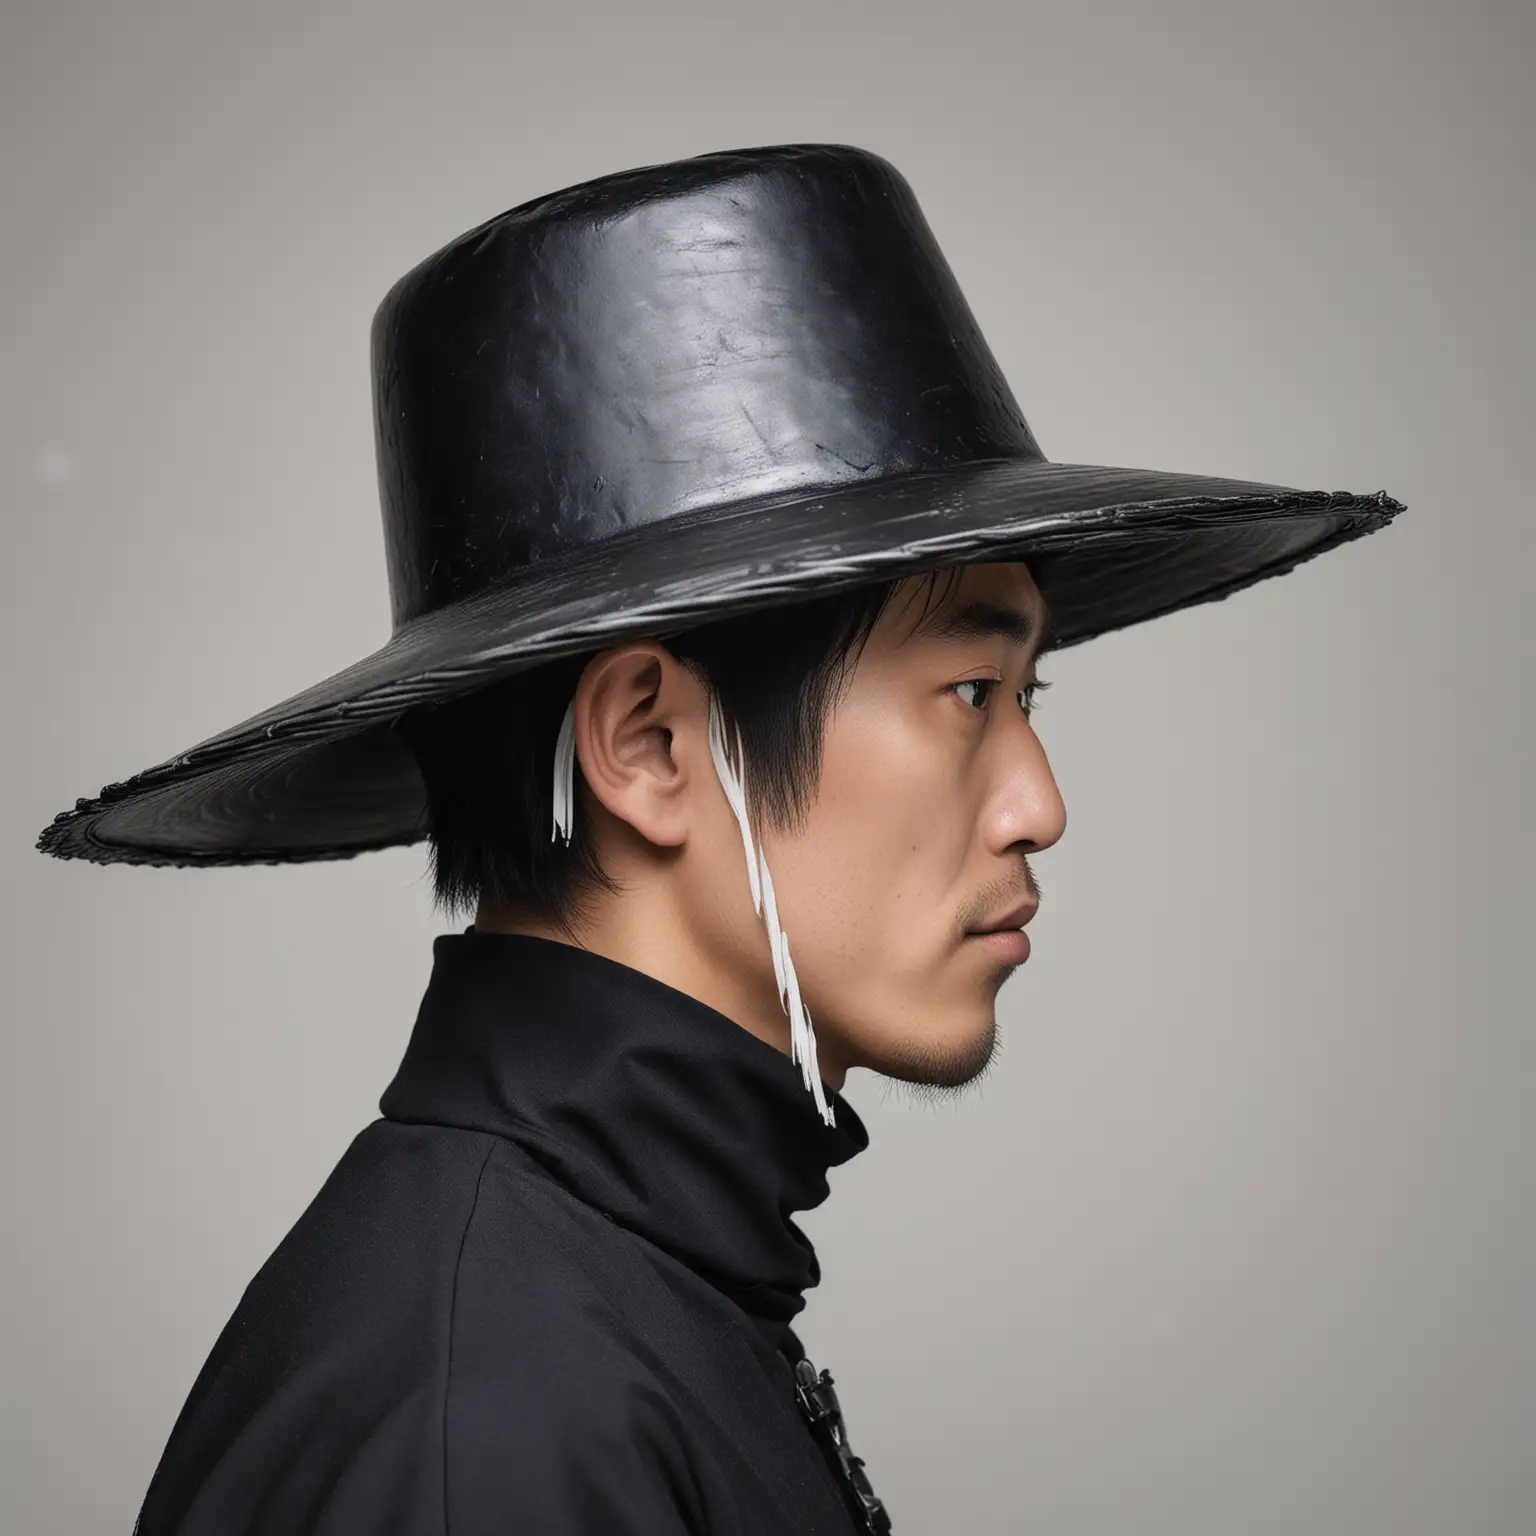 Portrait photograph, side profile view, Japanese man with white pupils and black metal conical hat, black turtleneck, white background